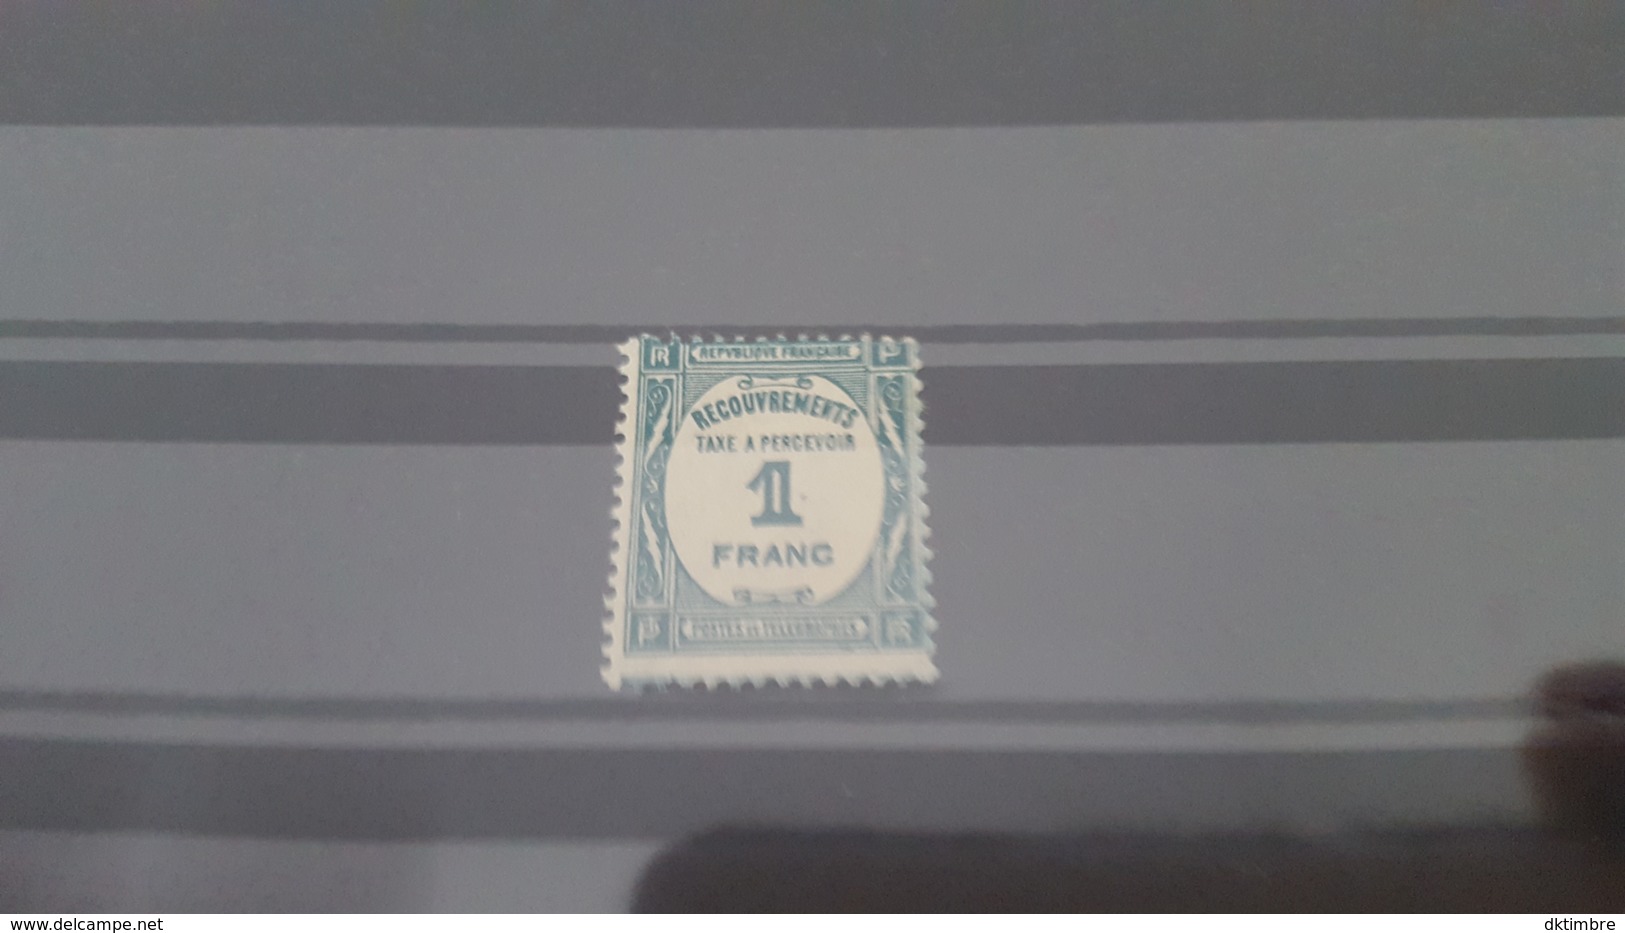 LOT 436051 TIMBRE DE FRANCE NEUF** LUXE - 1859-1959 Mint/hinged